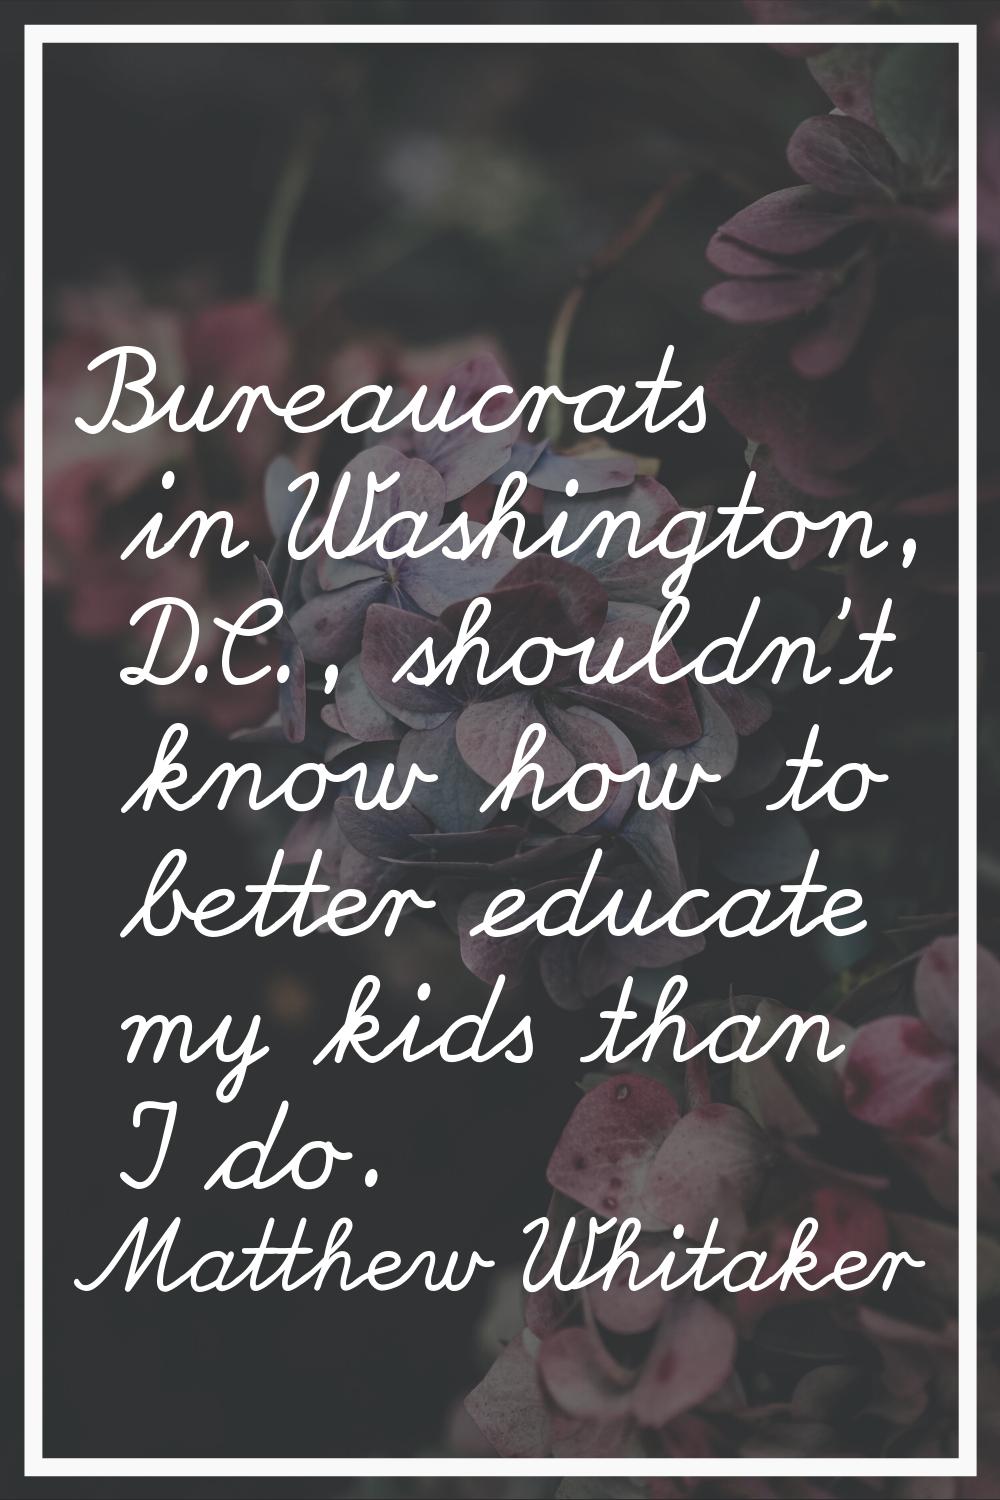 Bureaucrats in Washington, D.C., shouldn't know how to better educate my kids than I do.